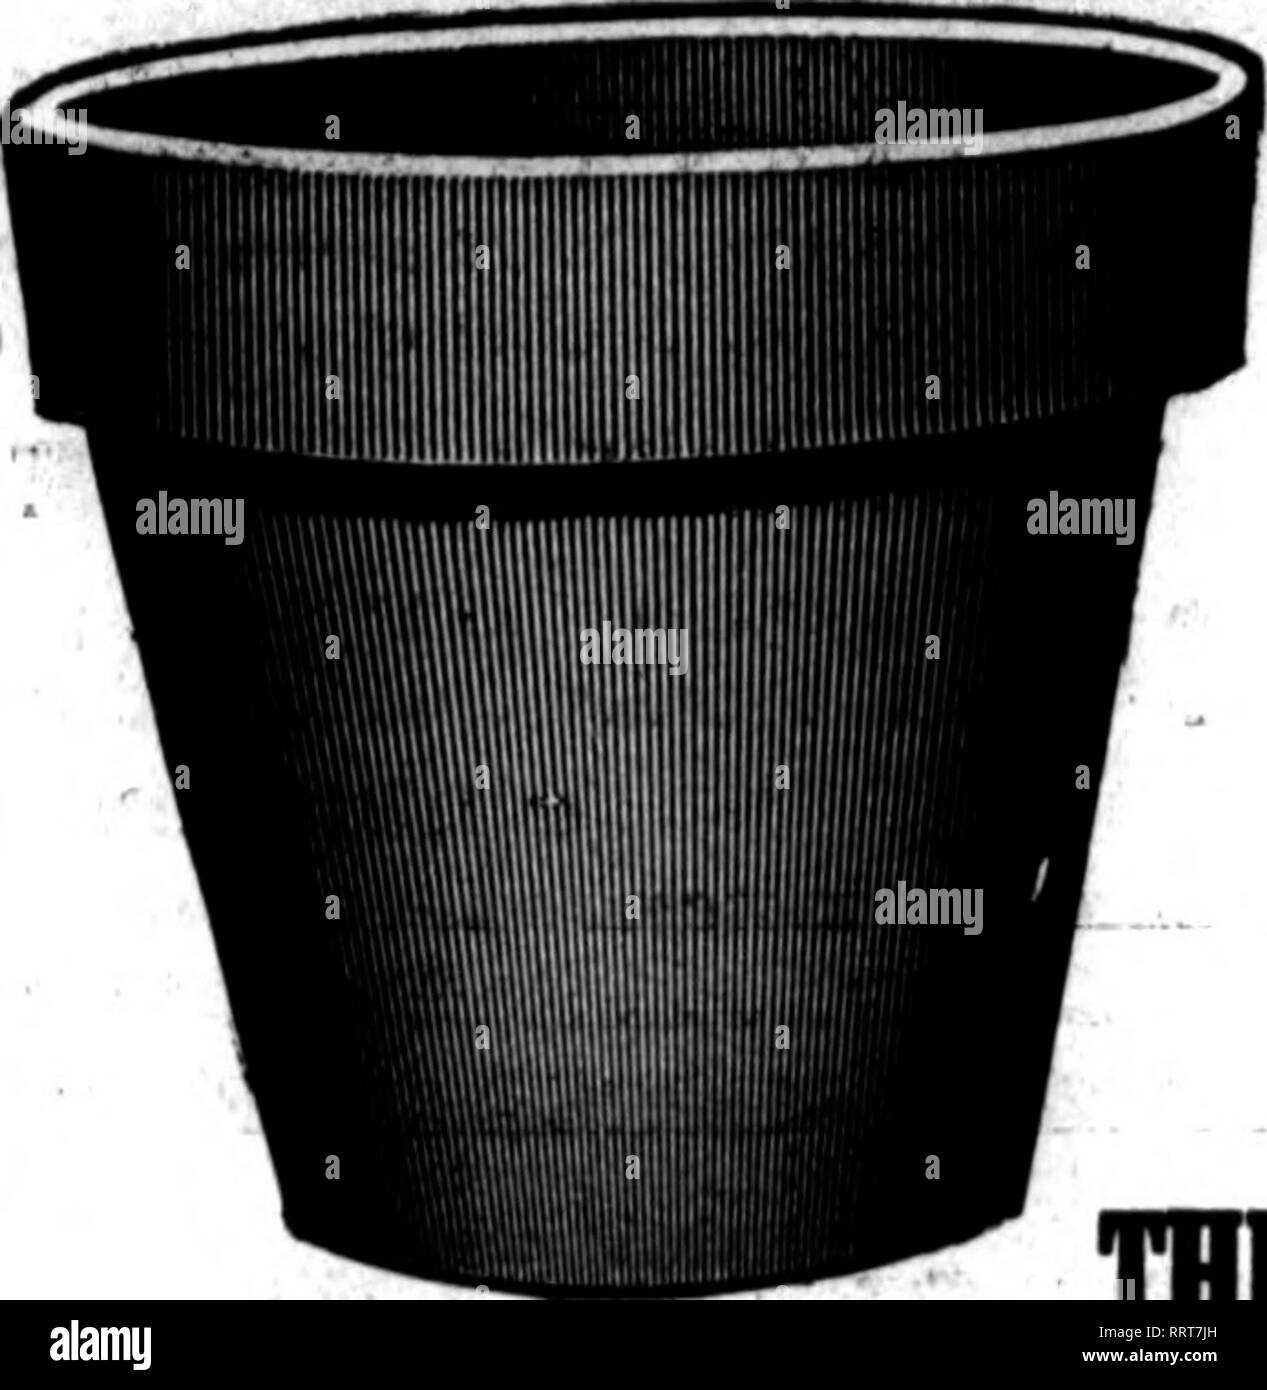 . Florists' review [microform]. Floriculture. STANDARD FjowerPots The Pfalbgraff Pottery Co. YORK, PA. Mention The Bcvlew whea yoa wtlta. 1000 Ready Packed Crates Standard Flower Pots and Balb Pans Omu be ihipped at an honr*! notioo. Price per crate: 456 4it-iB.. onte. I&amp;M IMO 1%-iB.. ante. t6.00 USOa &quot; 4.88 IMOak &quot; 6.26 Um2^ &quot; 6.00 IMOt &quot; 6.00 tMI&gt;a &quot; 6.80 M04 &quot; 4.60 8206 210 6i« 144 6 120 7 608 489 4810-in.. orate. 14.80 4.61 8.78 S.16 4.20 S.00 8.60 Wb^ Bm. Pittery, Firt Uwui H Y AUGUST ROLKBR * SONS. 81 Bmrciar SU New York City Aceate Ow Boeeialtr Lcmc  Stock Photo